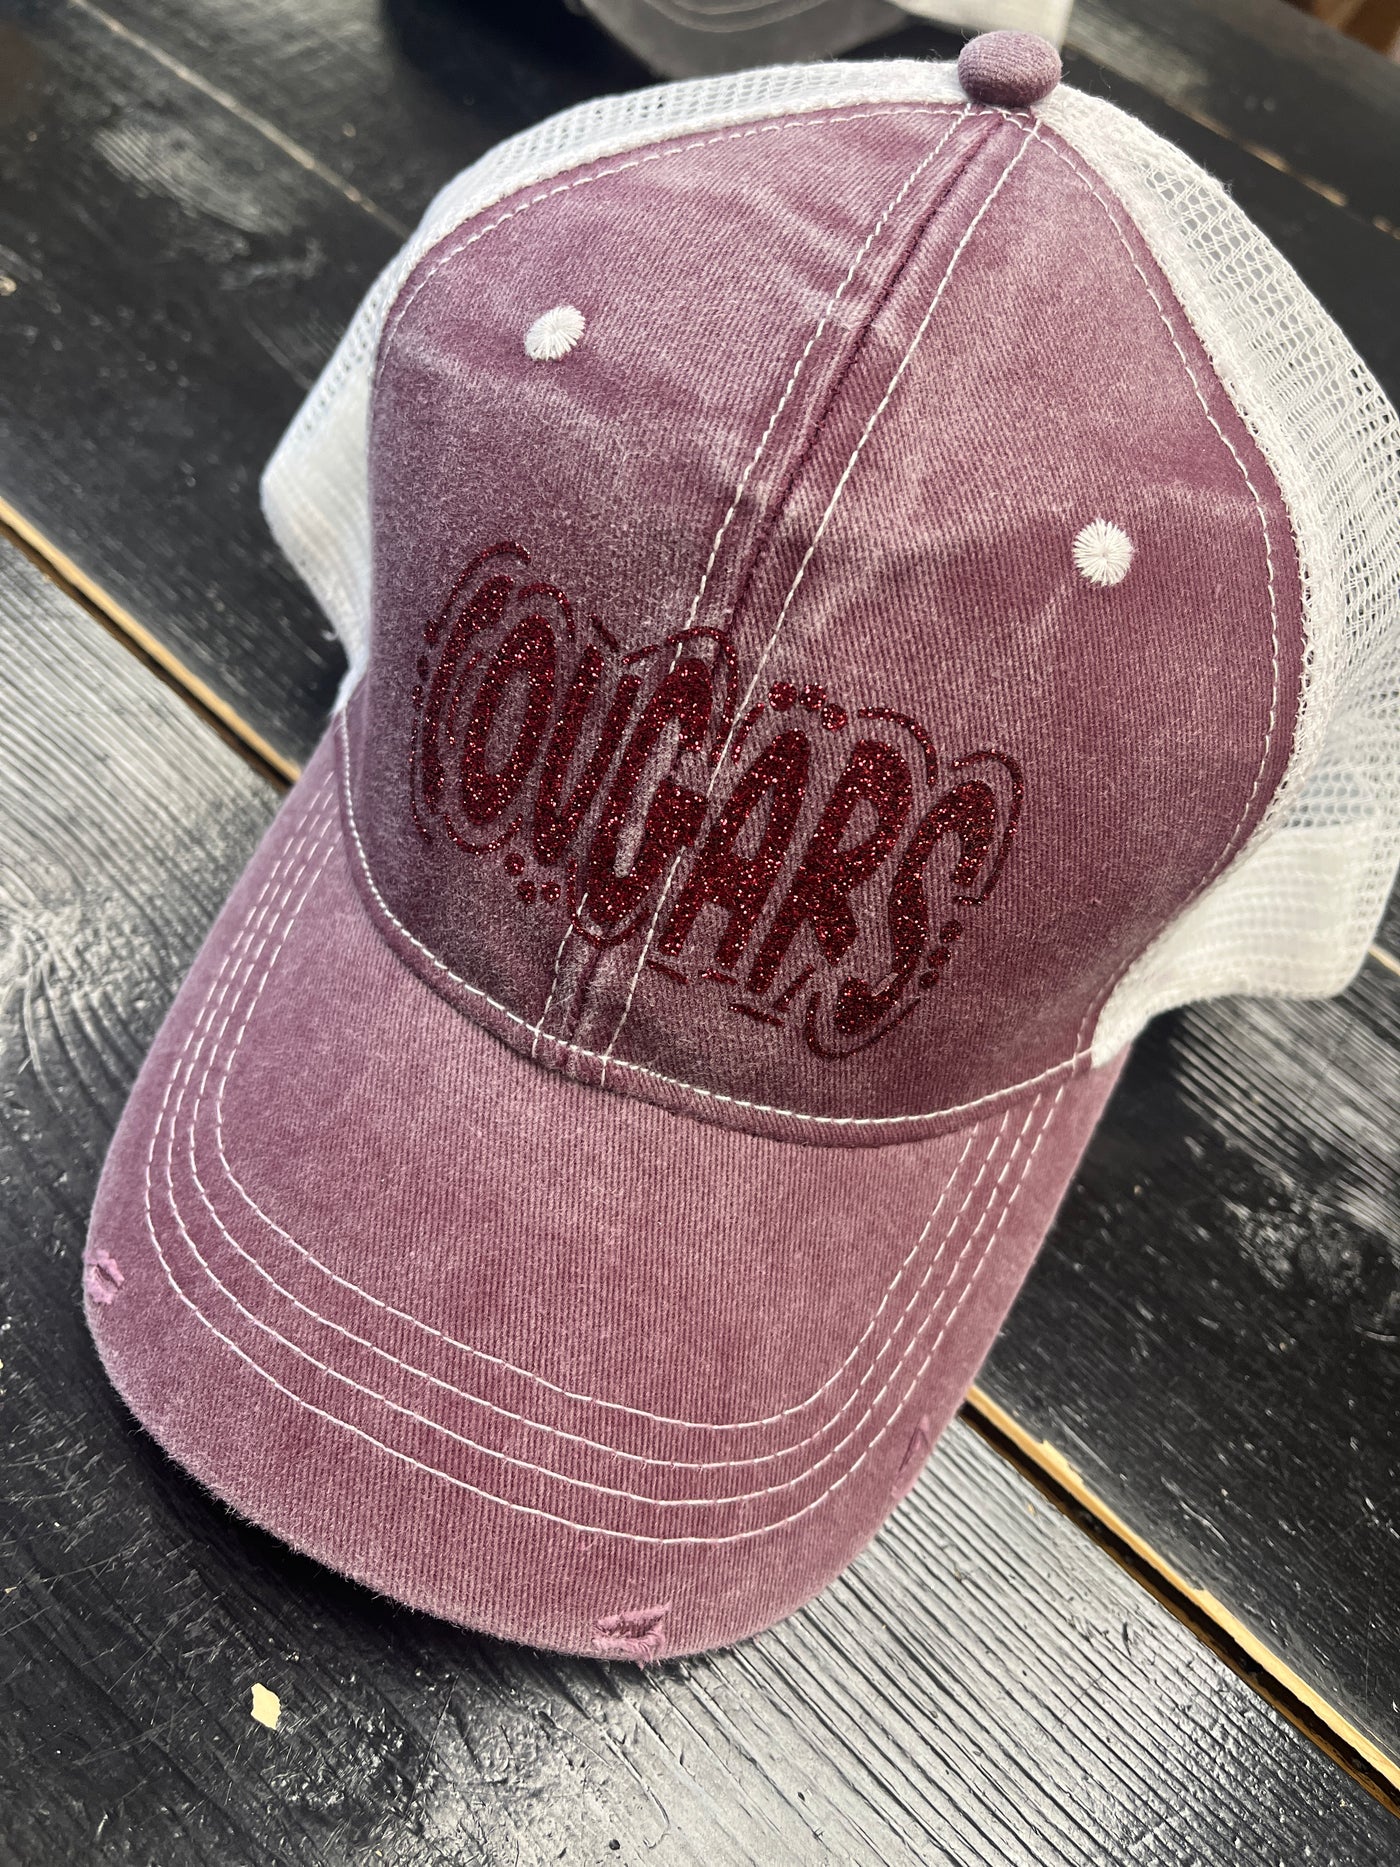 Cougars Ball Cap - Trucker Style